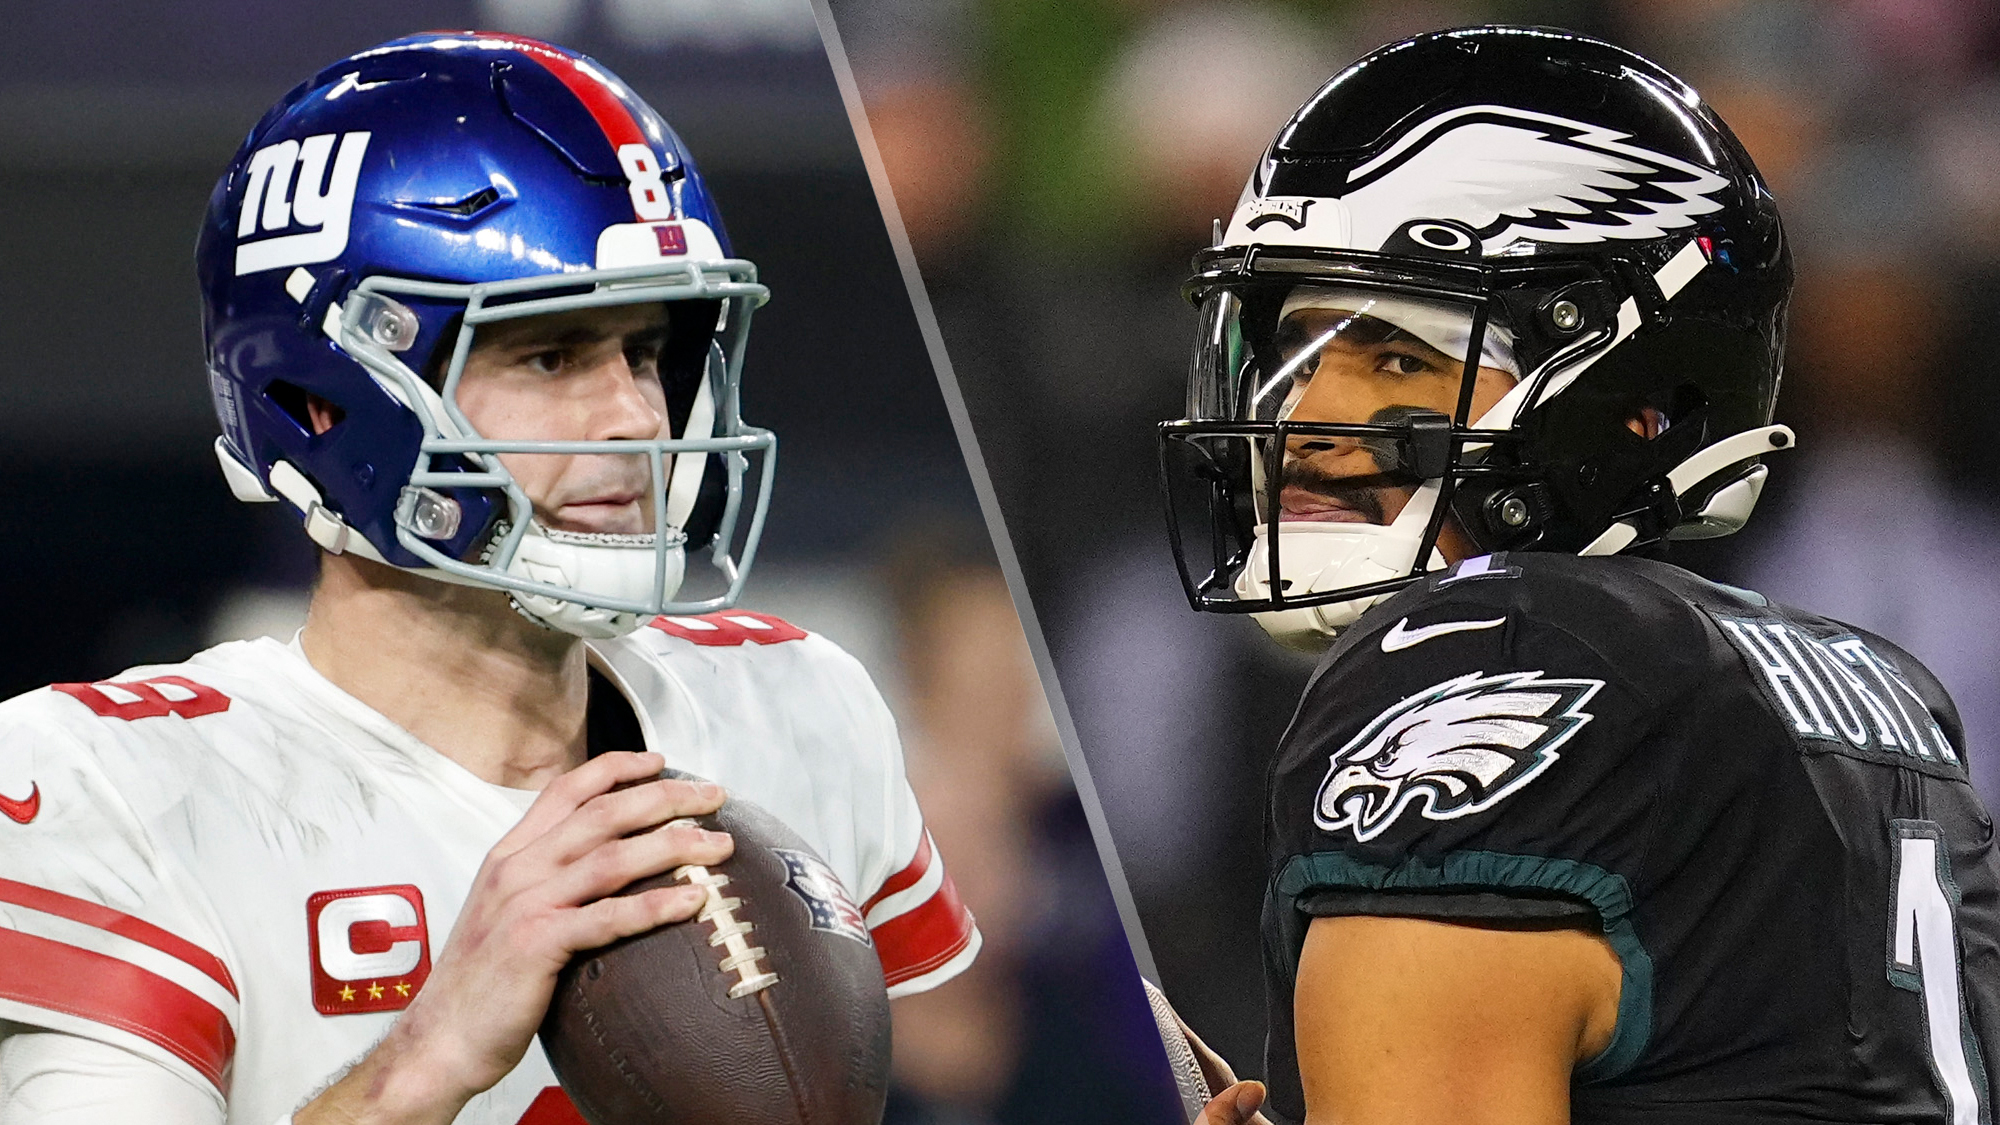 how to watch eagles giants game today